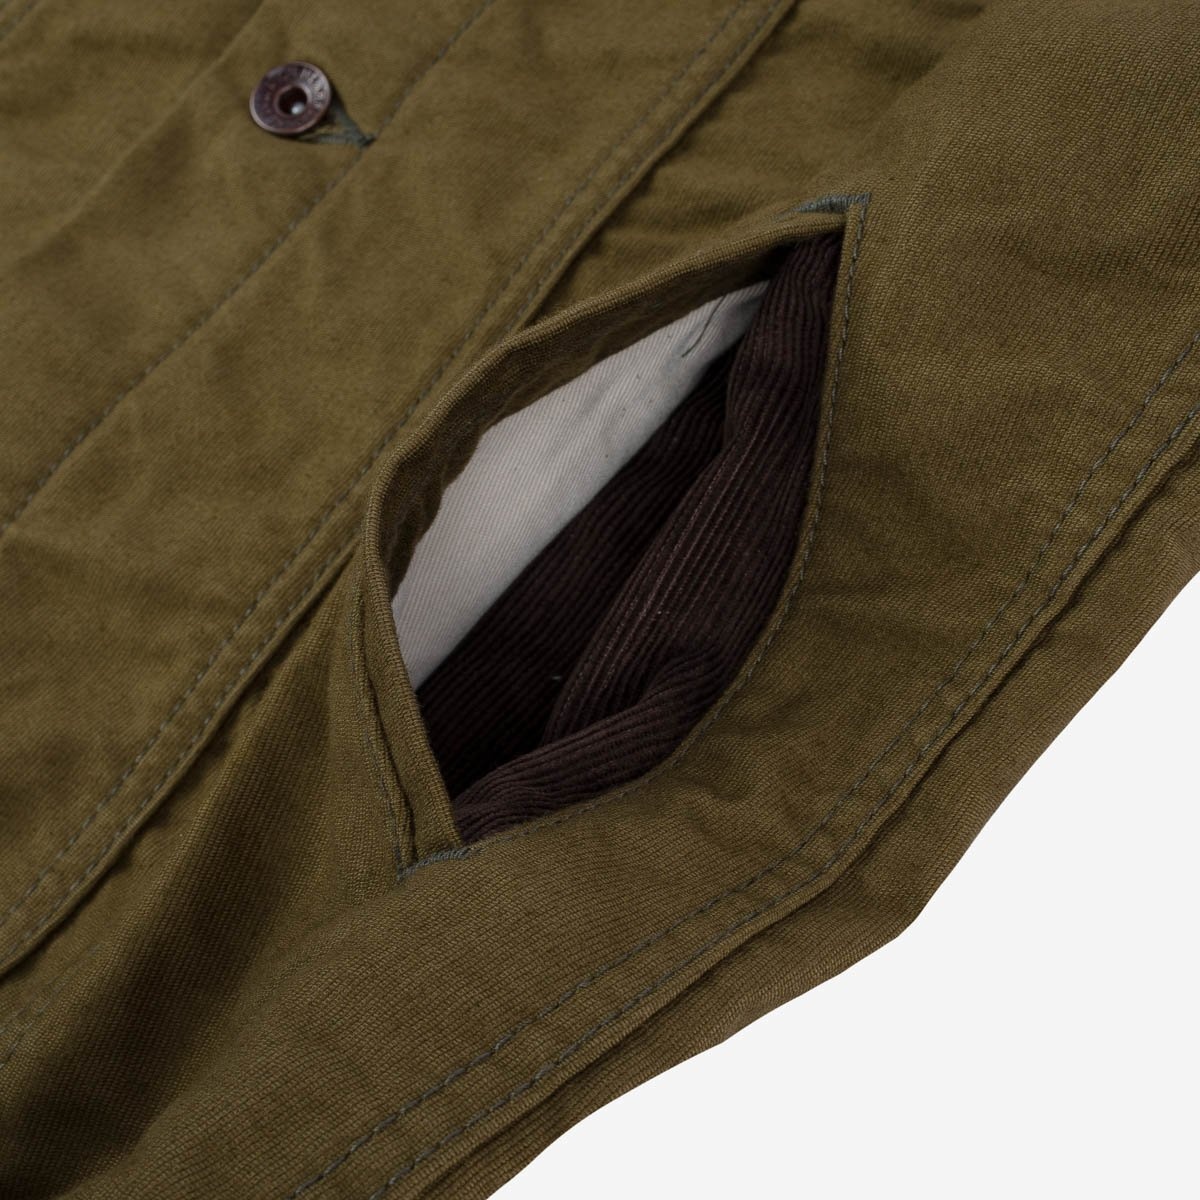 IH-526-ODG 12oz Whipcord Modified Type III Jacket - Olive Drab Green - 16